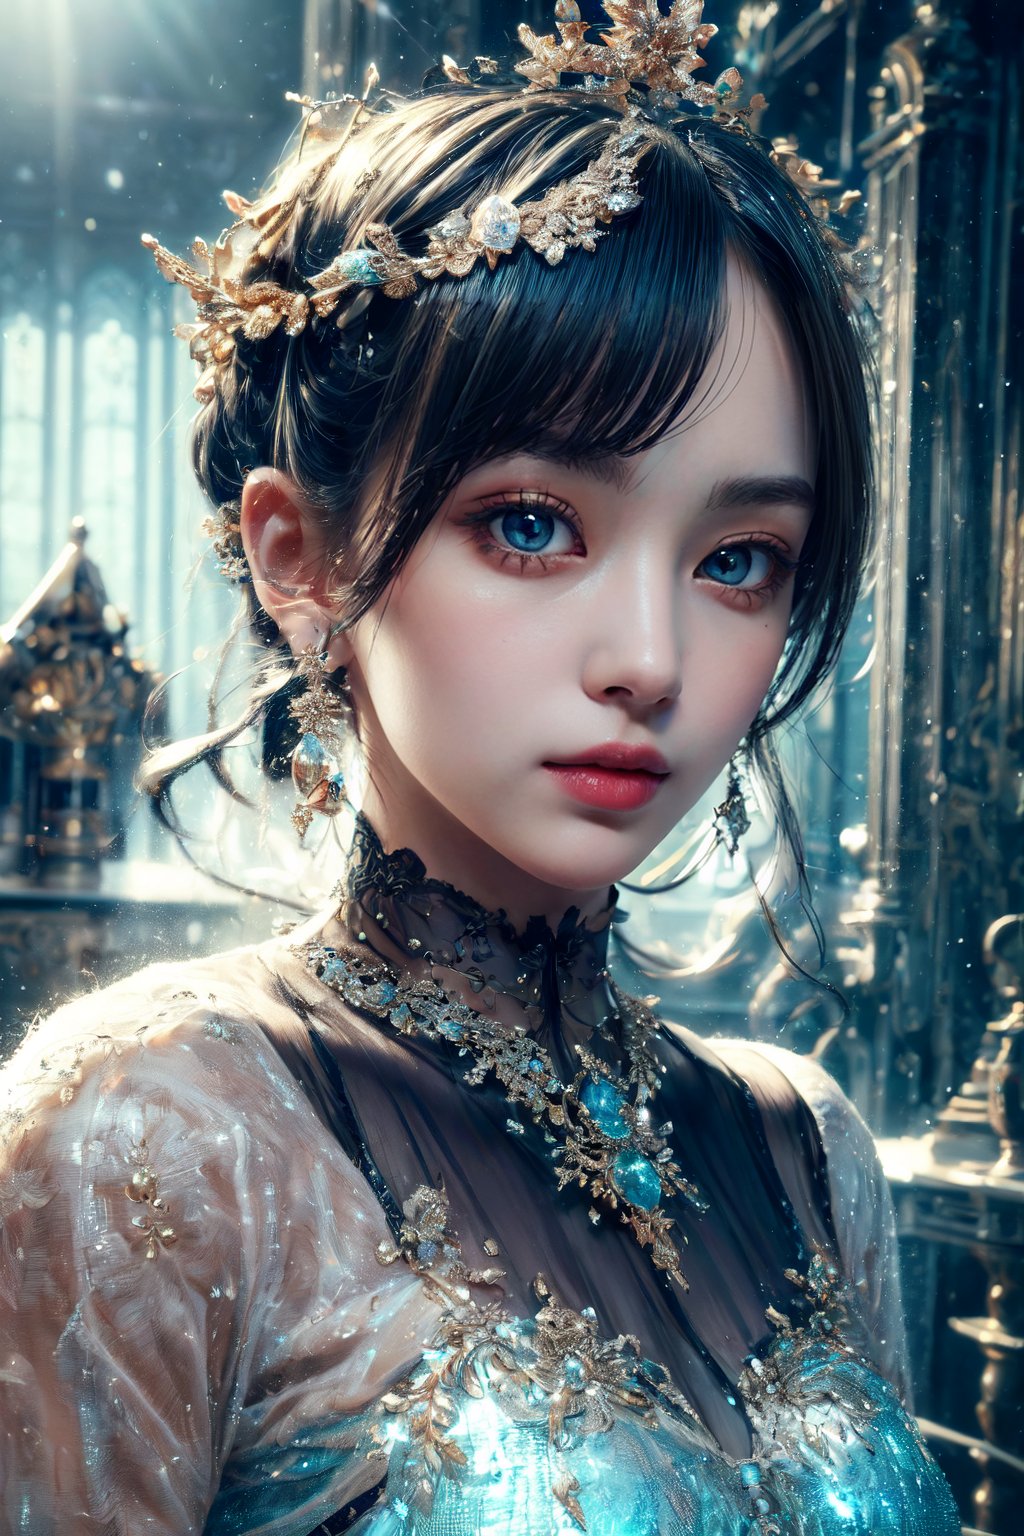 (masterpiece, high quality:1.5), 8K, HDR, 
1girl, well_defined_face, well_defined_eyes, ultra_detailed_eyes, ultra_detailed_face, by FuturEvoLab, 
ethereal lighting, immortal, elegant, porcelain skin, jet-black hair, waves, pale face, ice-blue eyes, blood-red lips, pinhole photograph, retro aesthetic, monochromatic backdrop, mysterious, enigmatic, timeless allure, the siren of the night, secrets, longing, hidden dangers, captivating, nostalgia, timeless fascination, Edge feathering and holy light, Exquisite face,